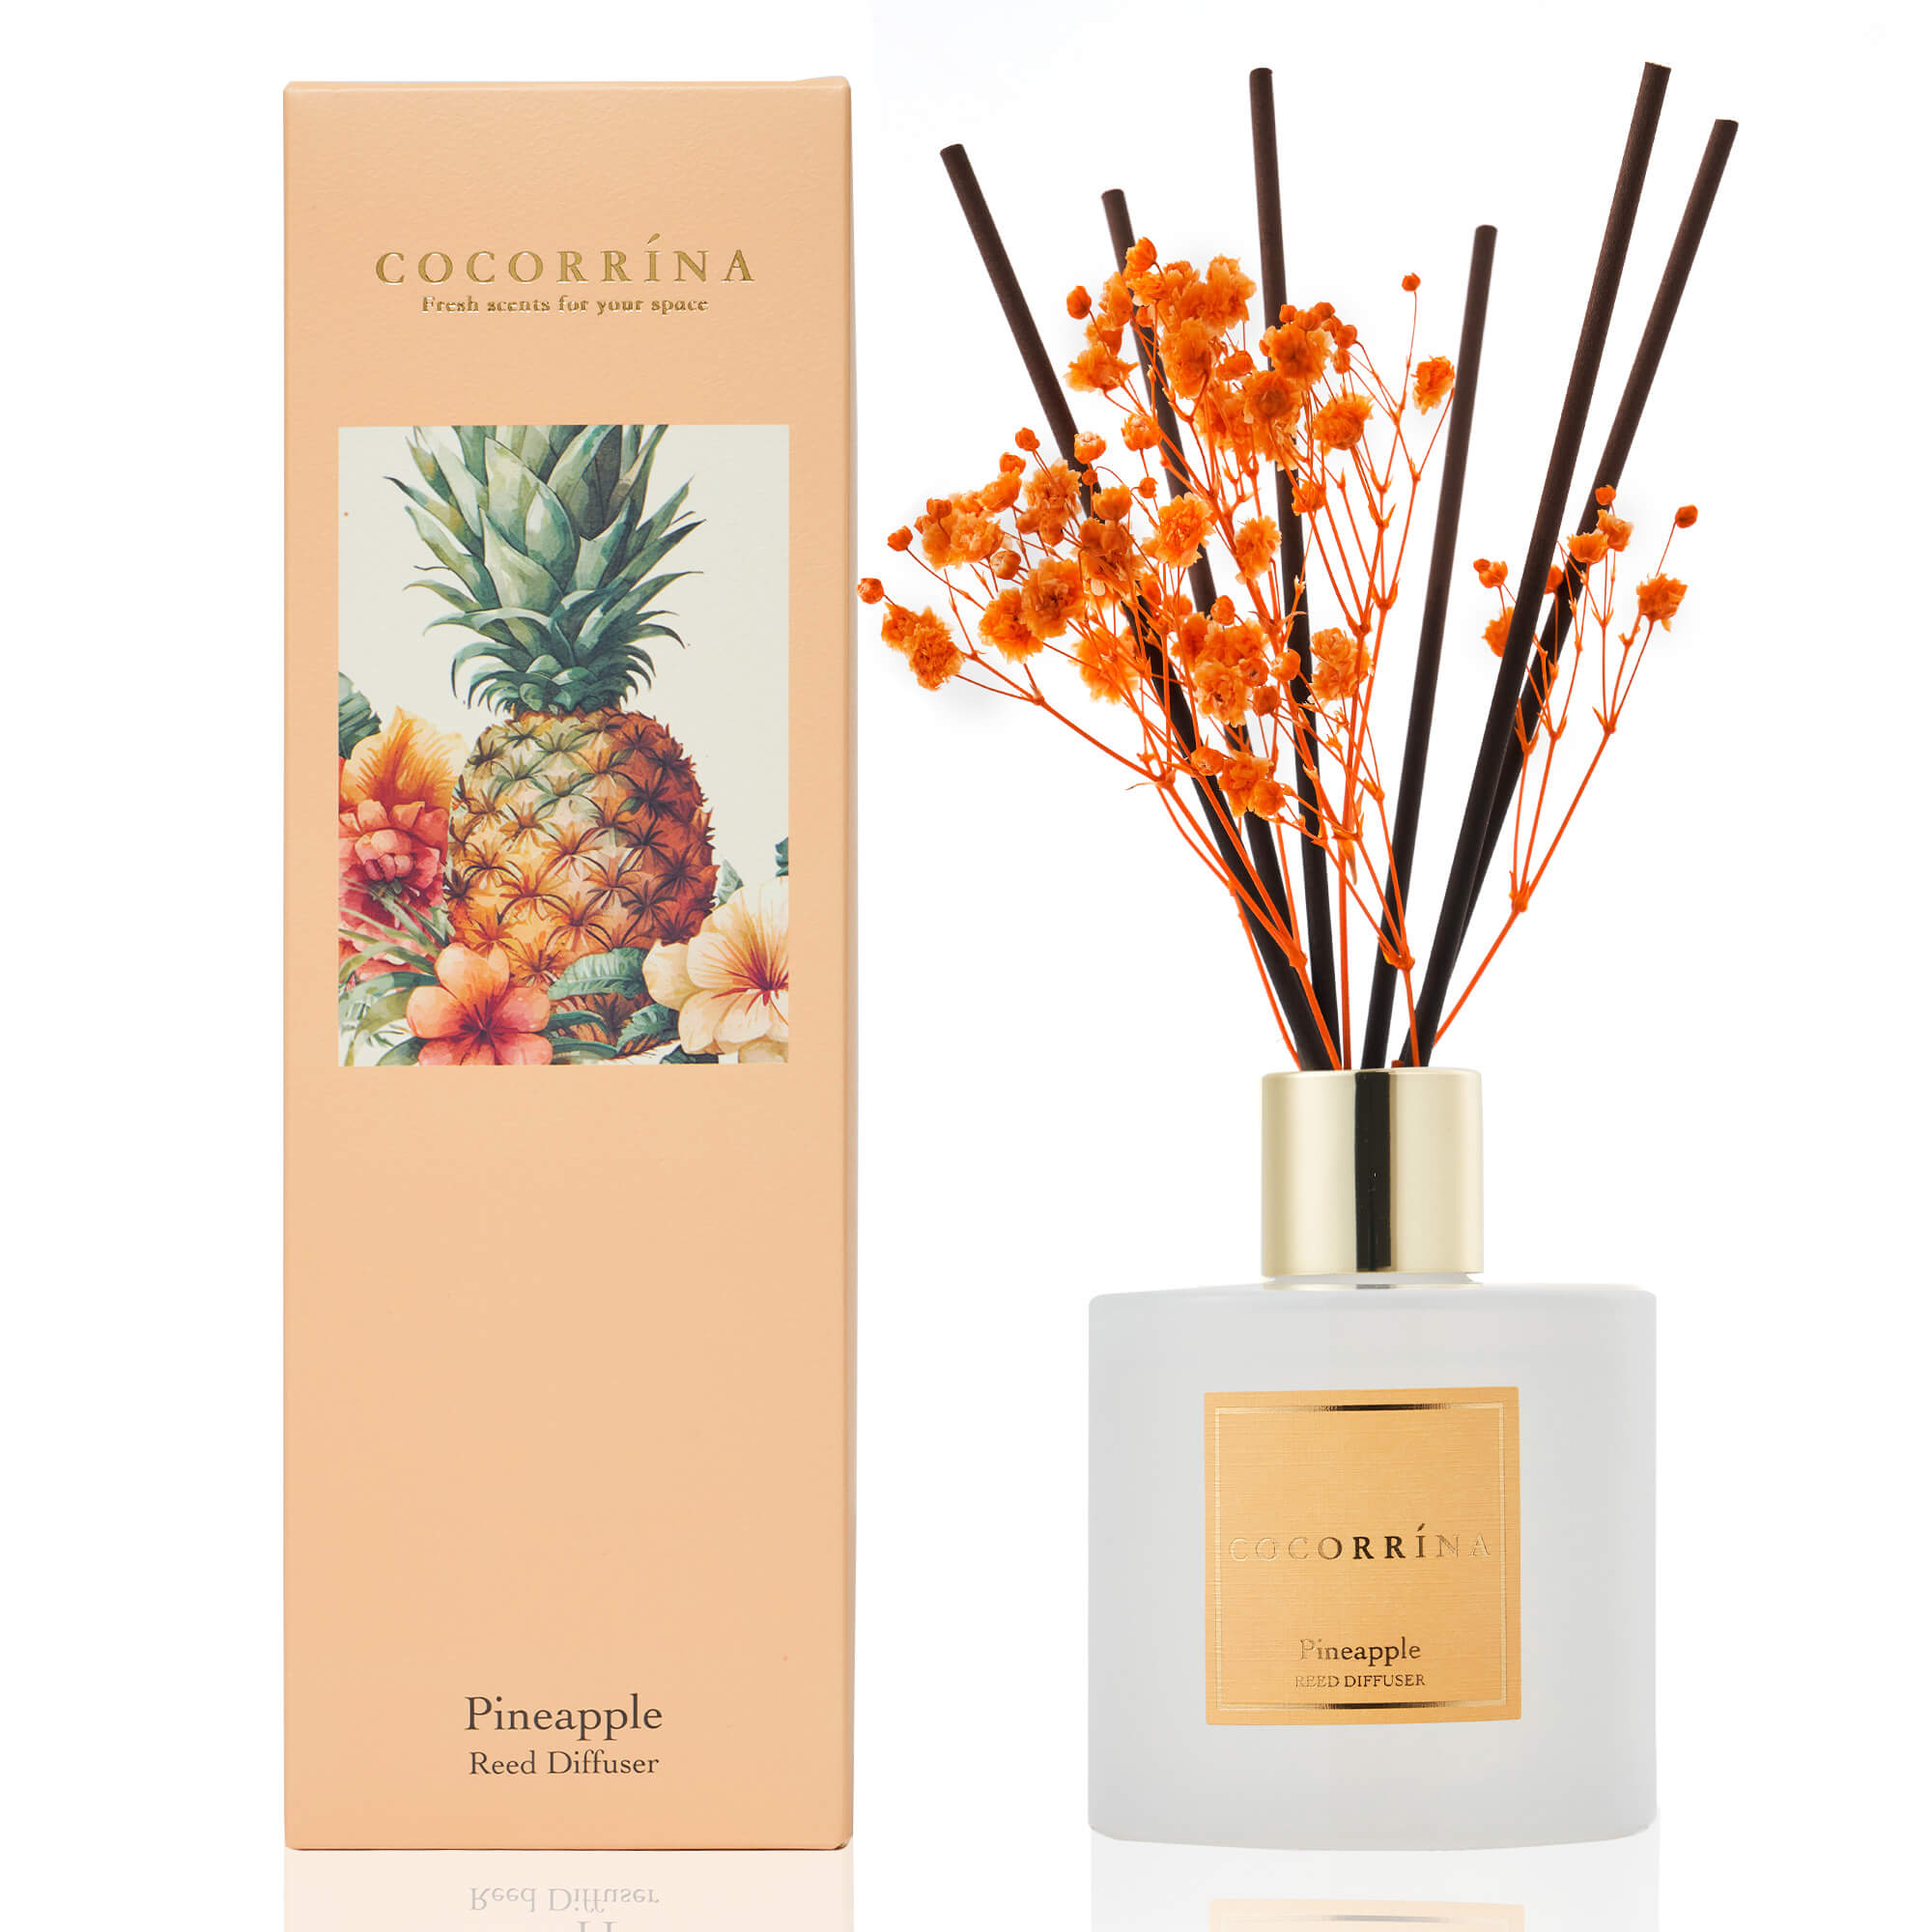 COCORRÍNA Pineapple Reed Diffuser Set